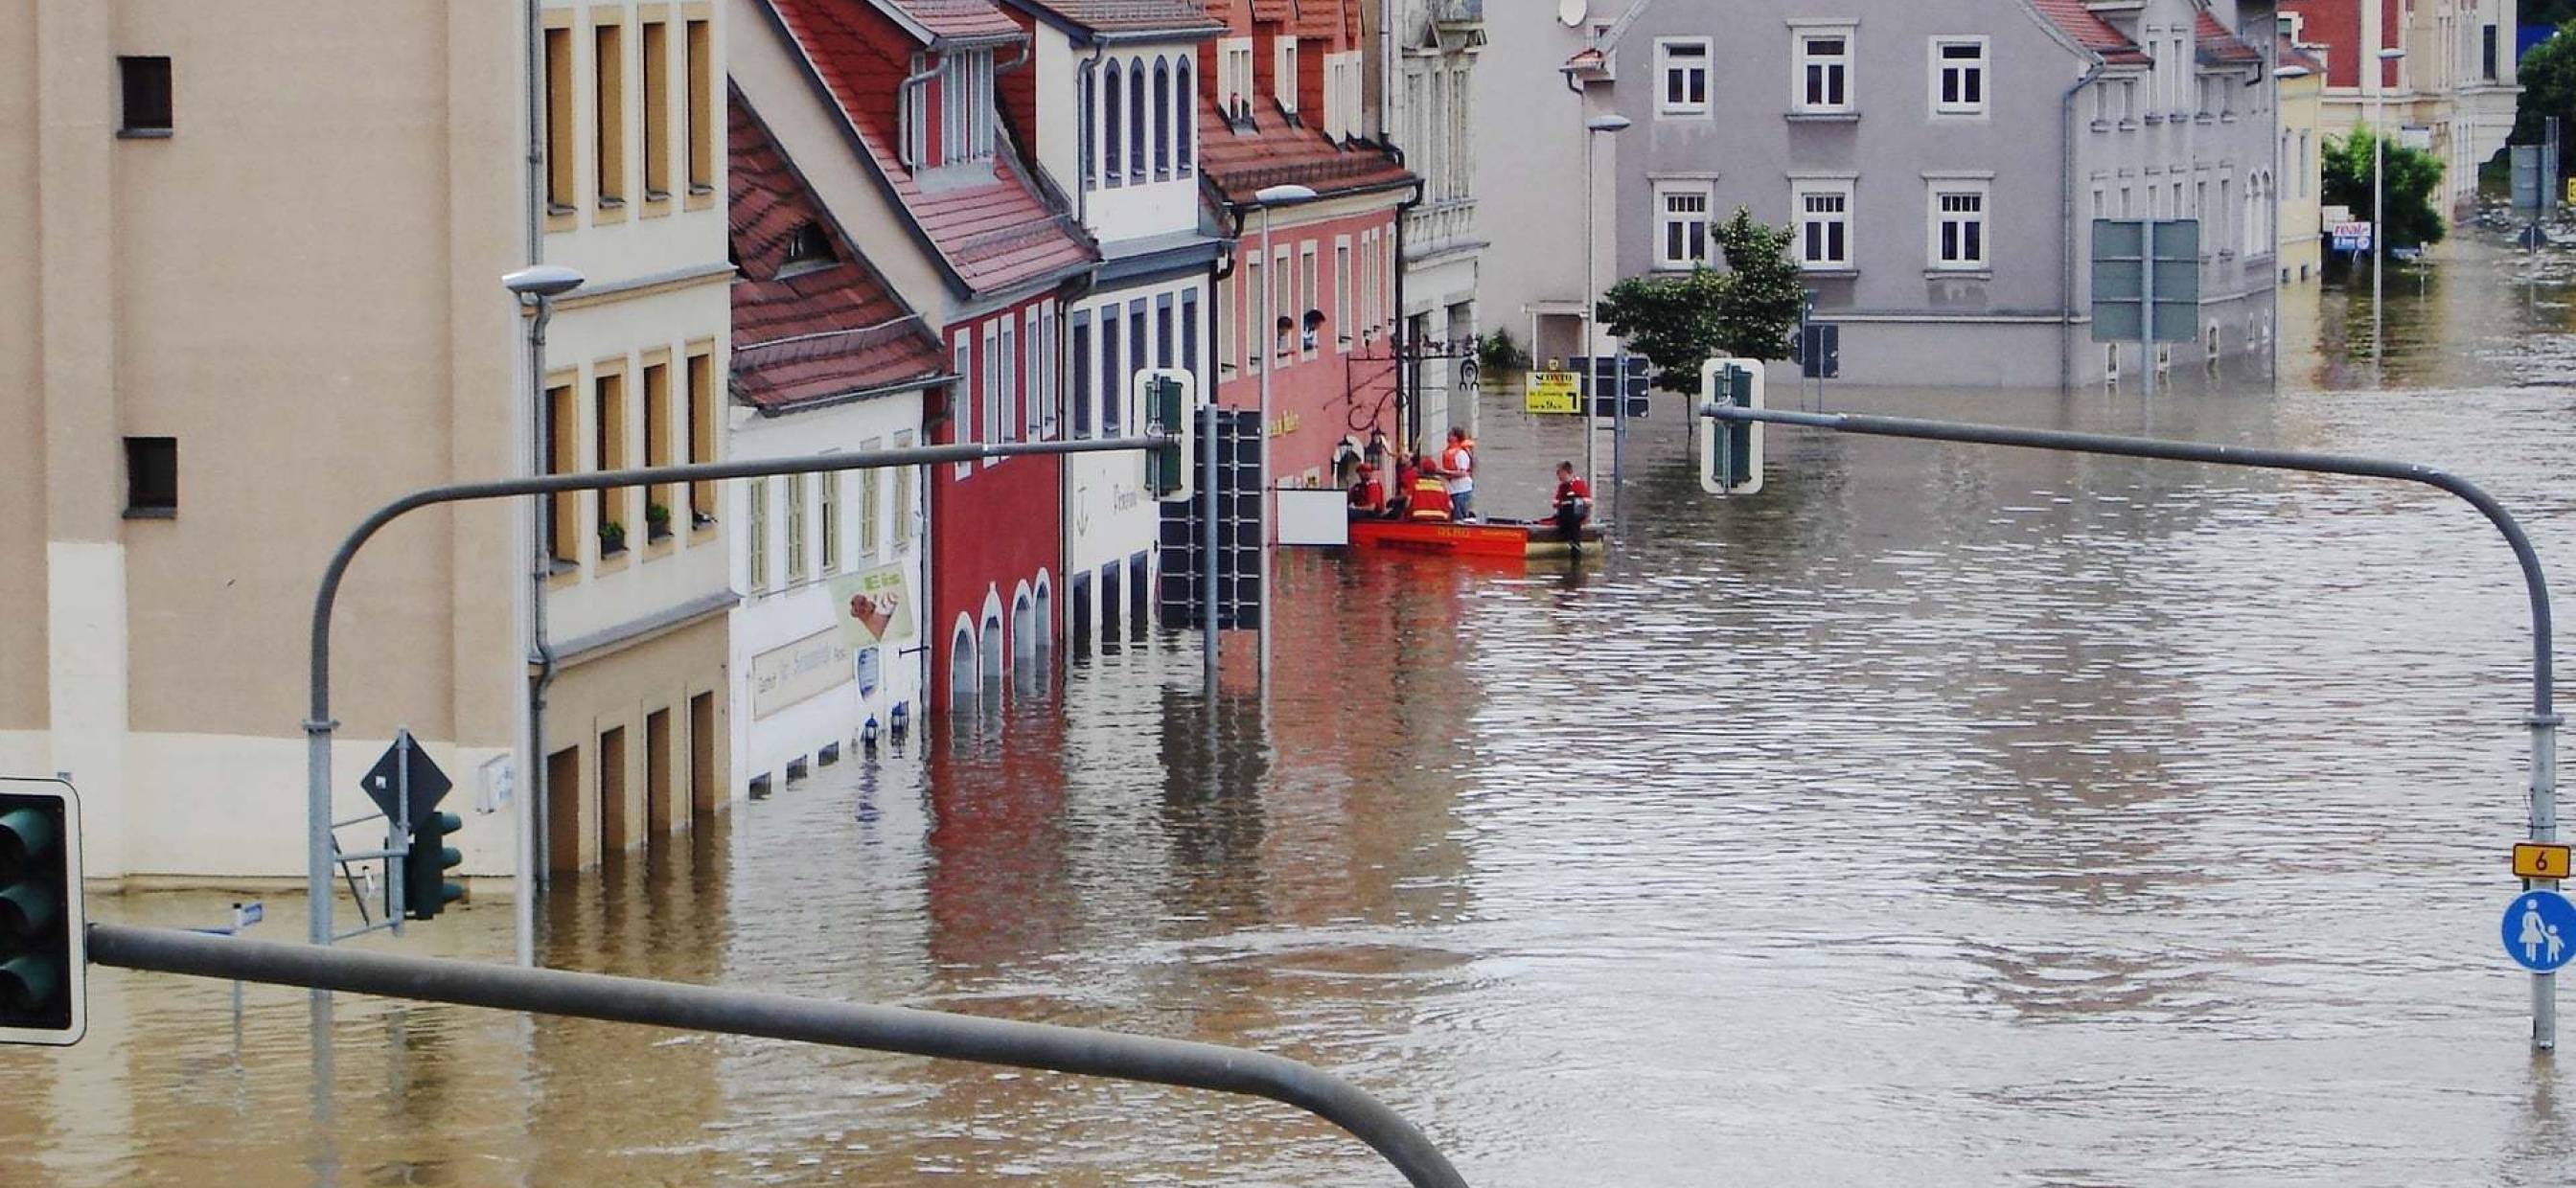 The Effect of Flood Zones on Property Values